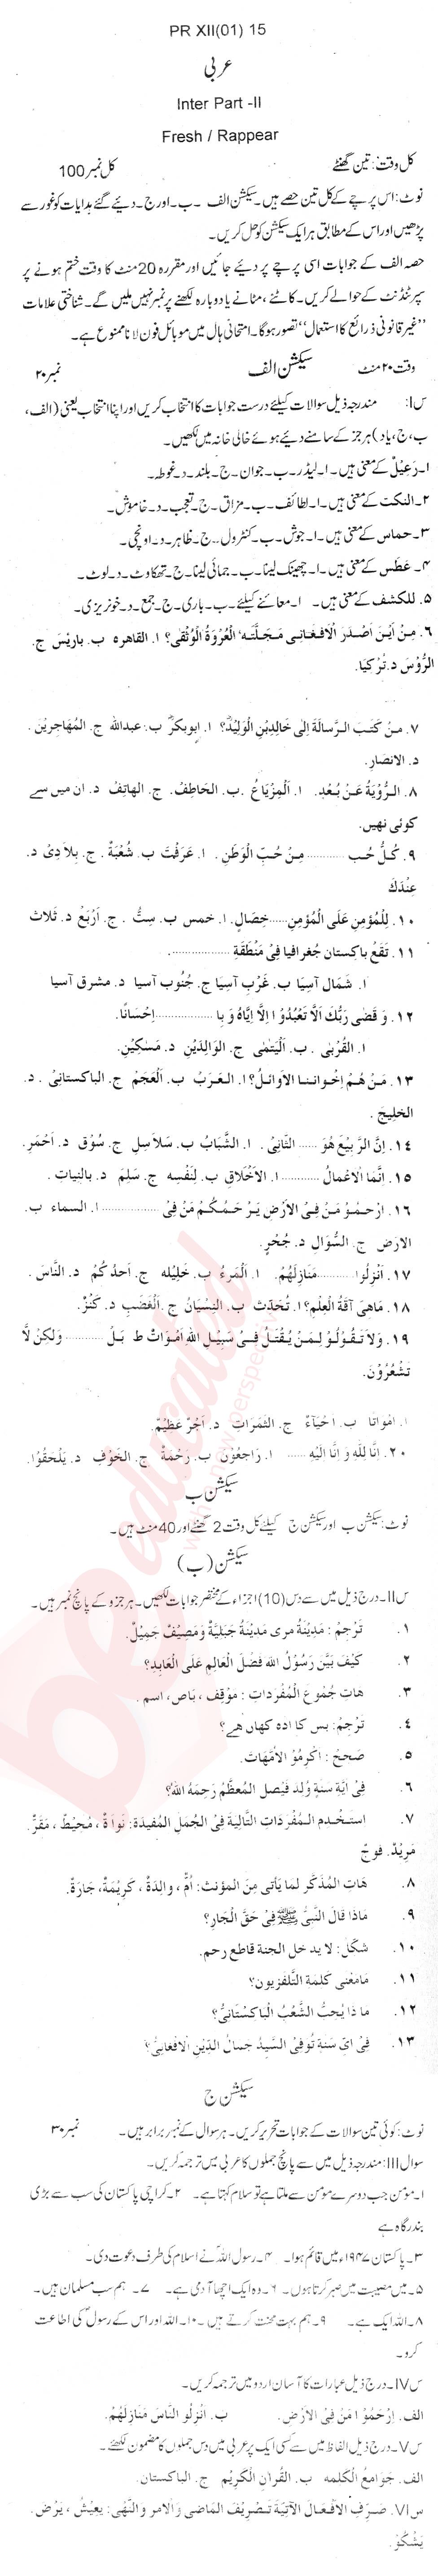 Arabic FA Part 2 Past Paper Group 1 BISE Malakand 2015